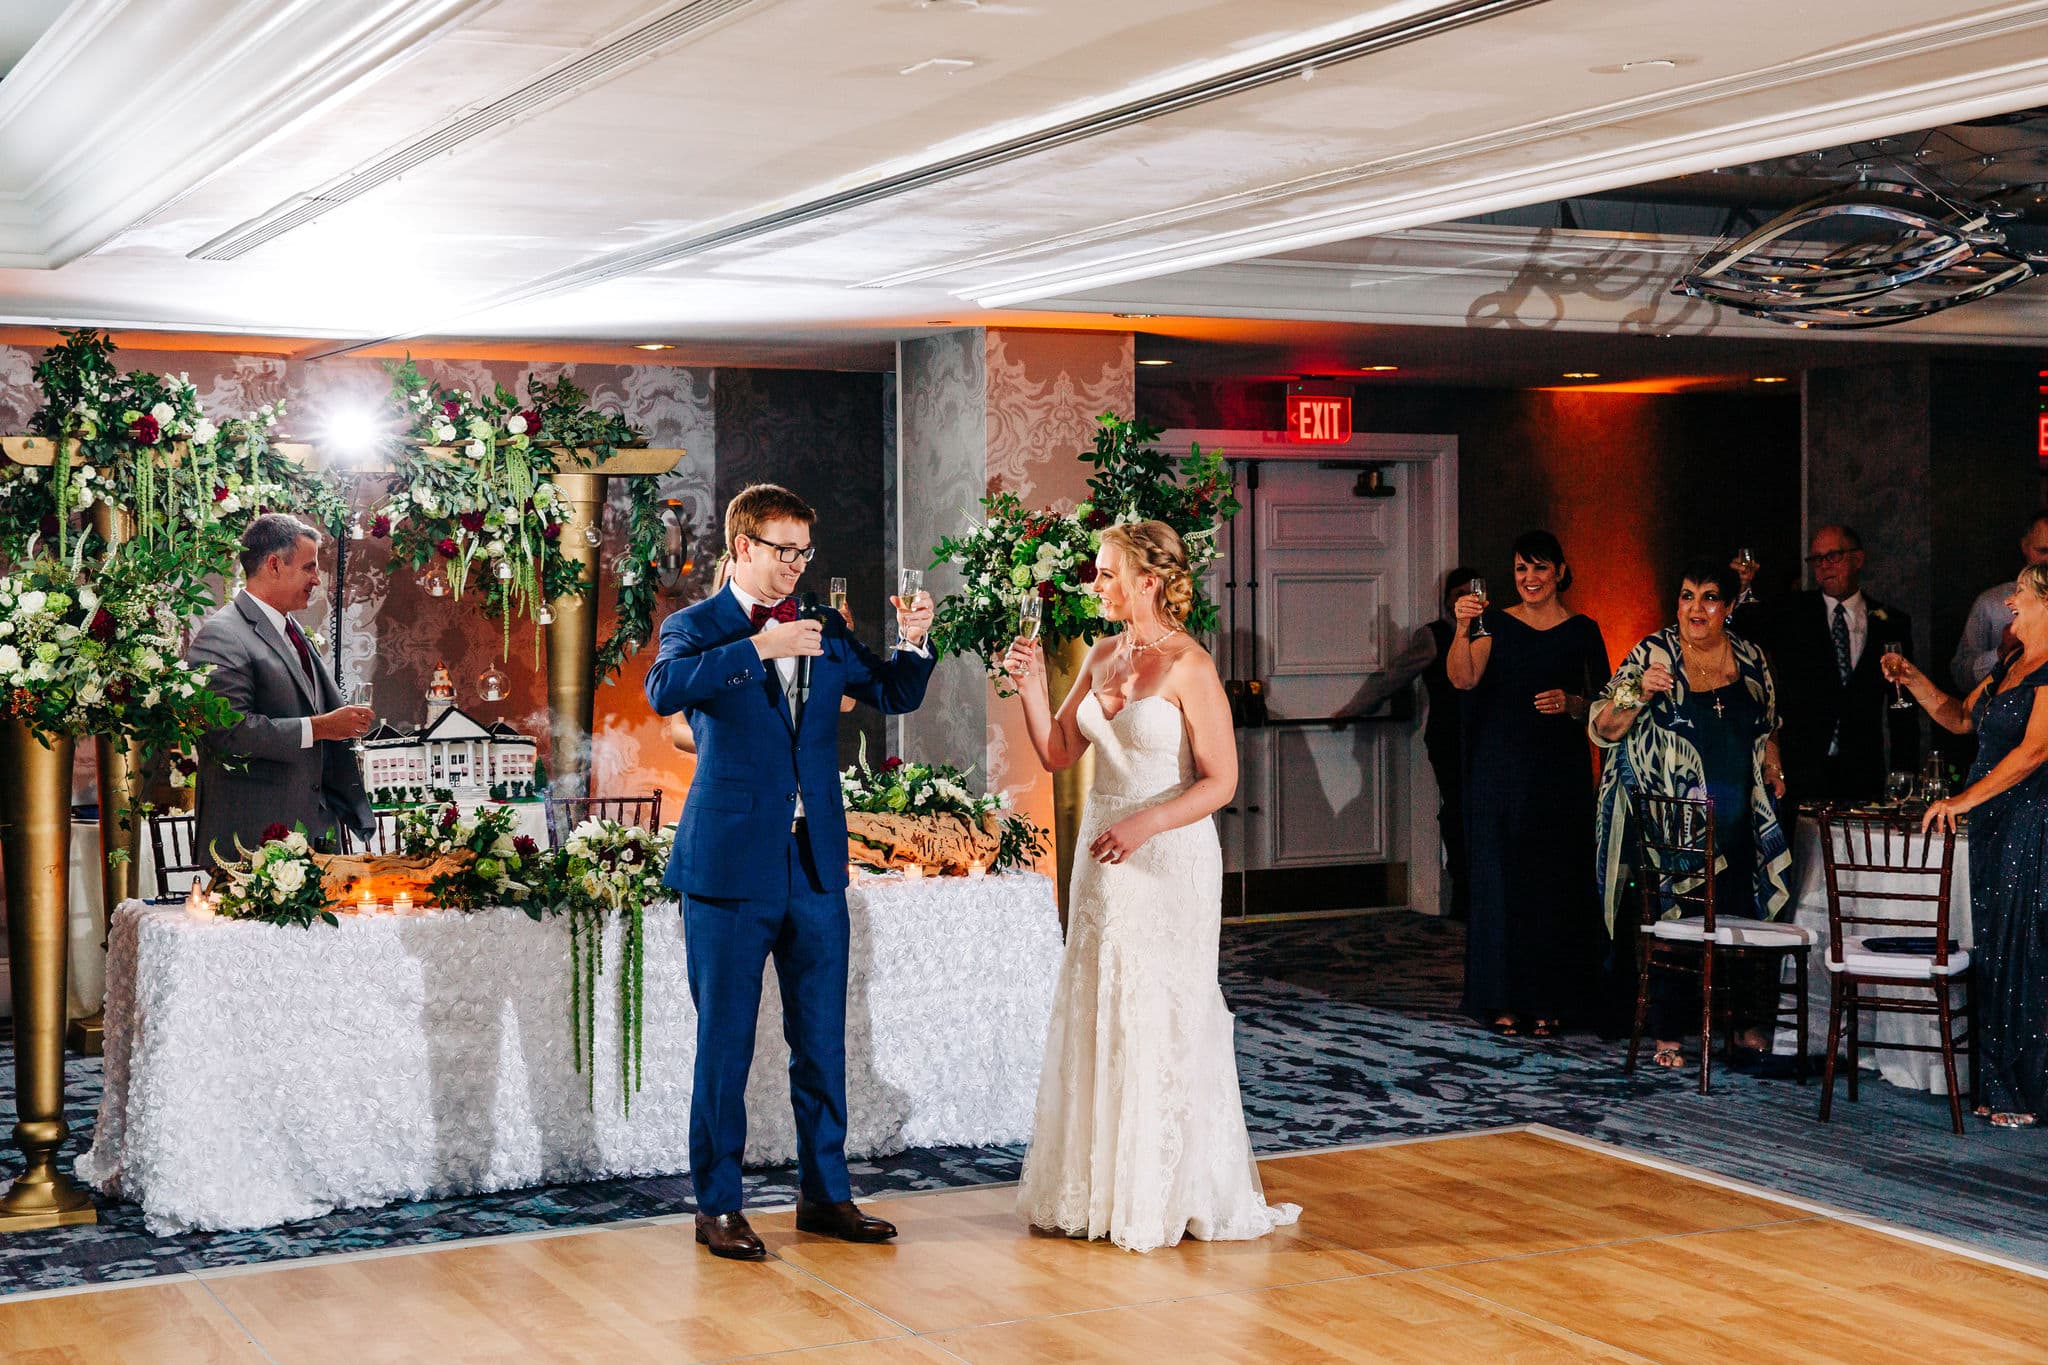 bride with strapless lace dress with groom with navy suit with wooden dance floor with bridal tablescape in background at vinoy wedding